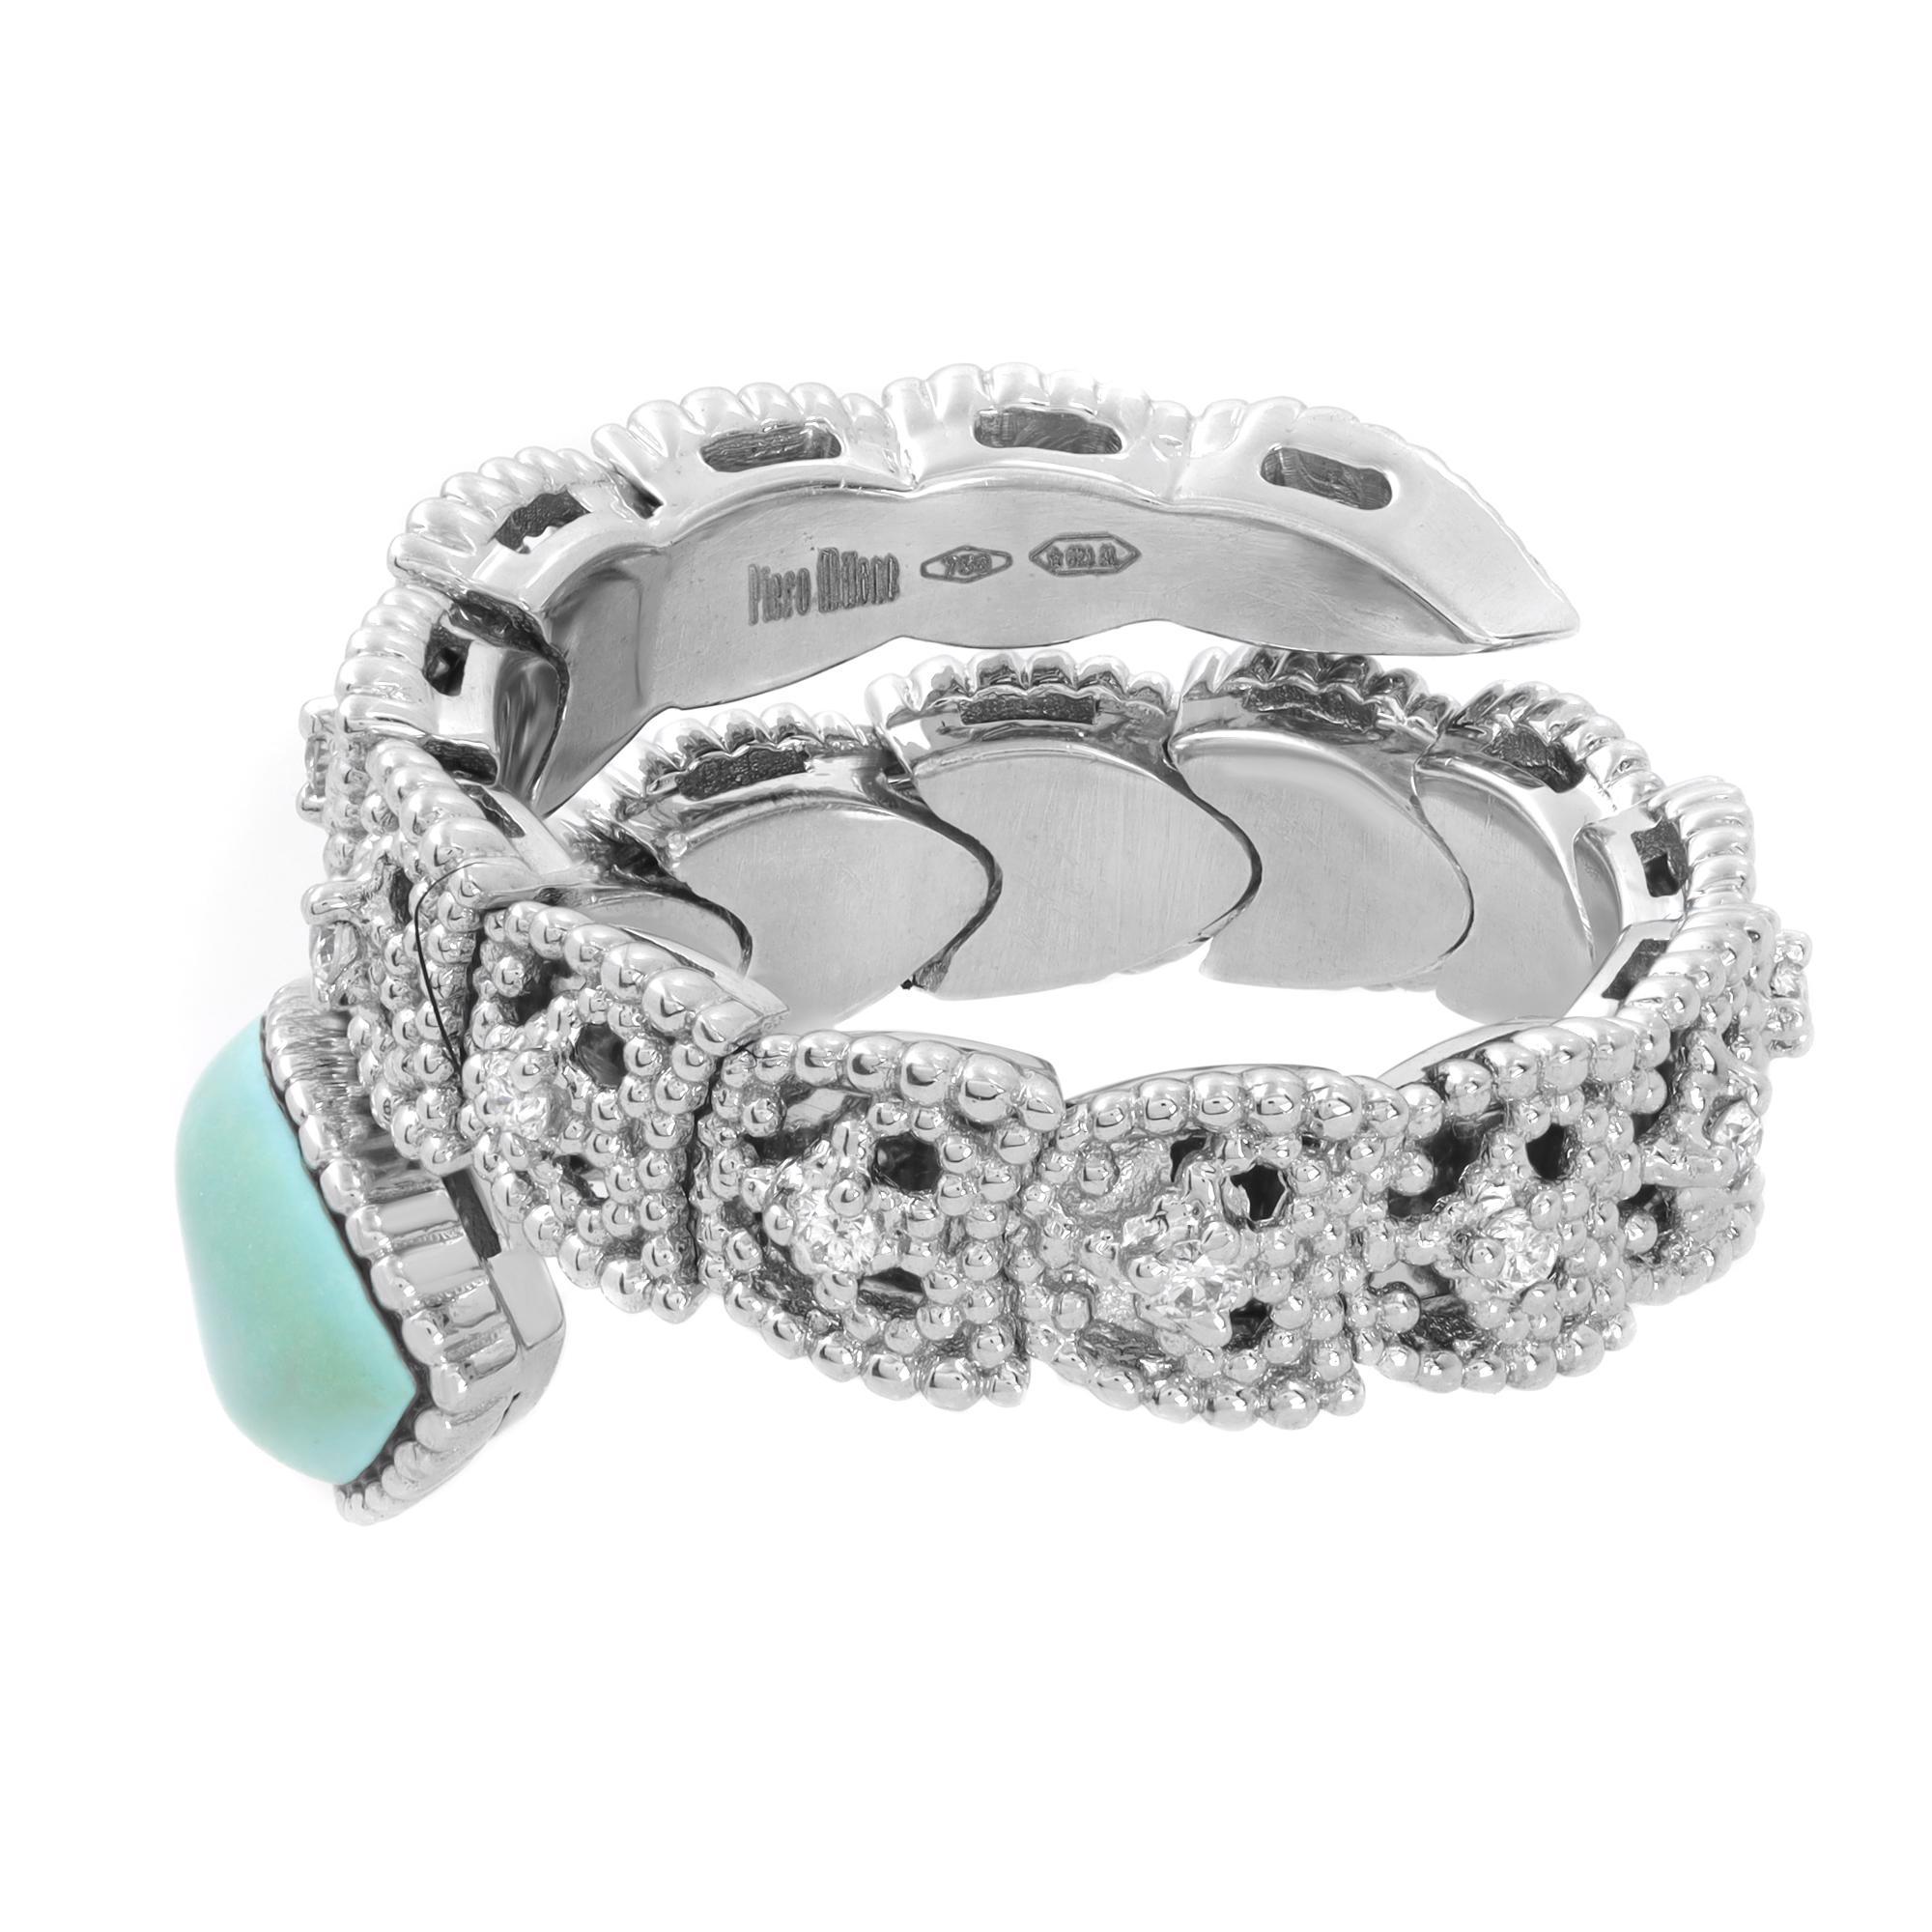 A gorgeous Piero Milano 18K White Gold Diamond Flexible Ring. It has a Beautiful Turquoise stone connected to the Double Flexible Ring Decorated by a set of 16 Diamonds 0.18 cttw, G-H Color and VS-SI Clarity. The Ring Weights 9 grams. Size 6.5. It